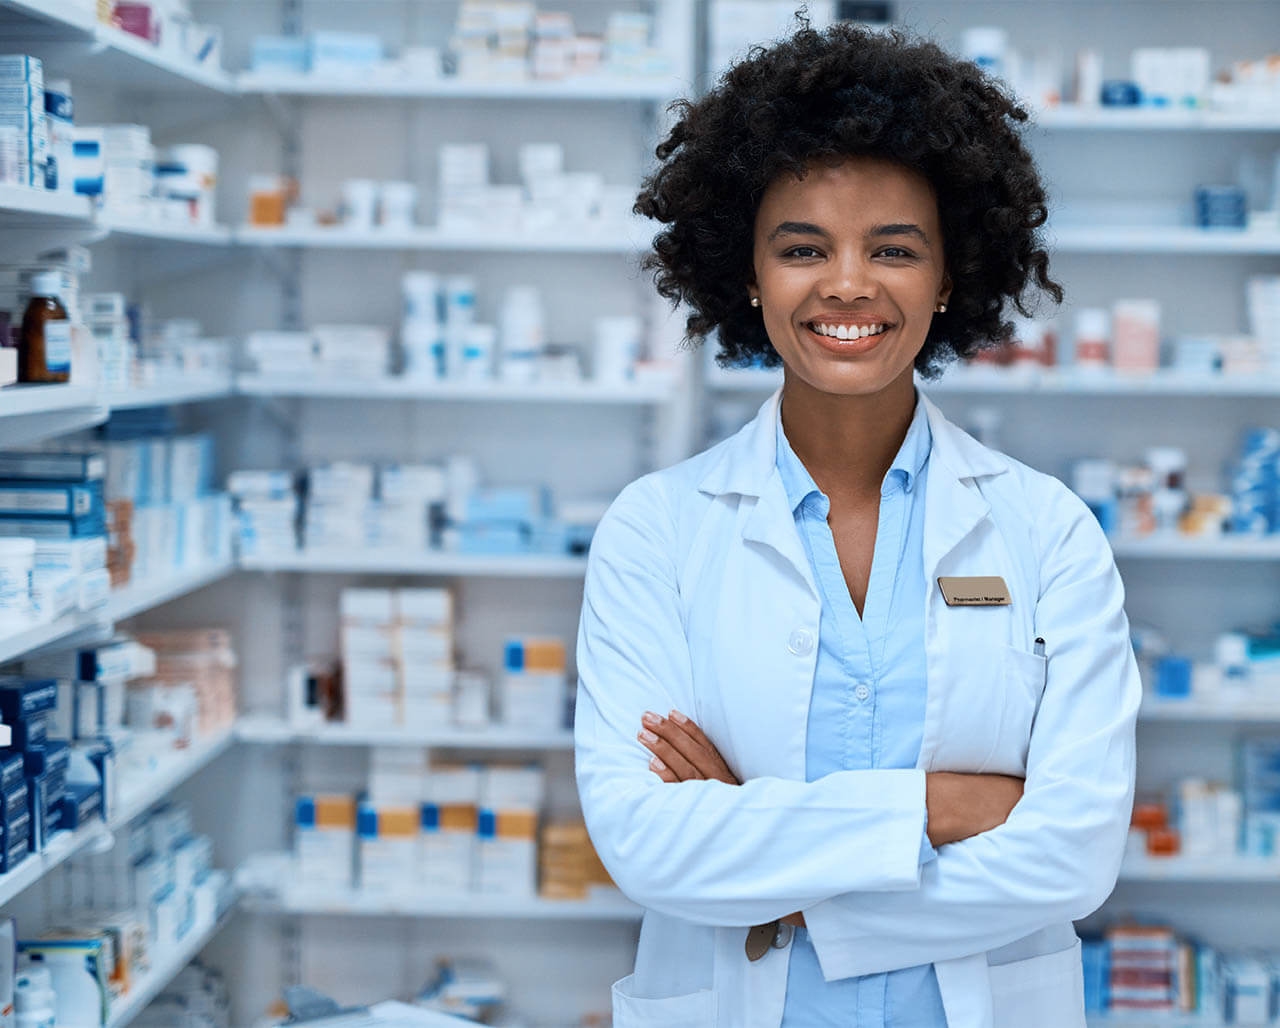 Female pharmacy manager standing smiling with arms folded in front of drug supply closet.